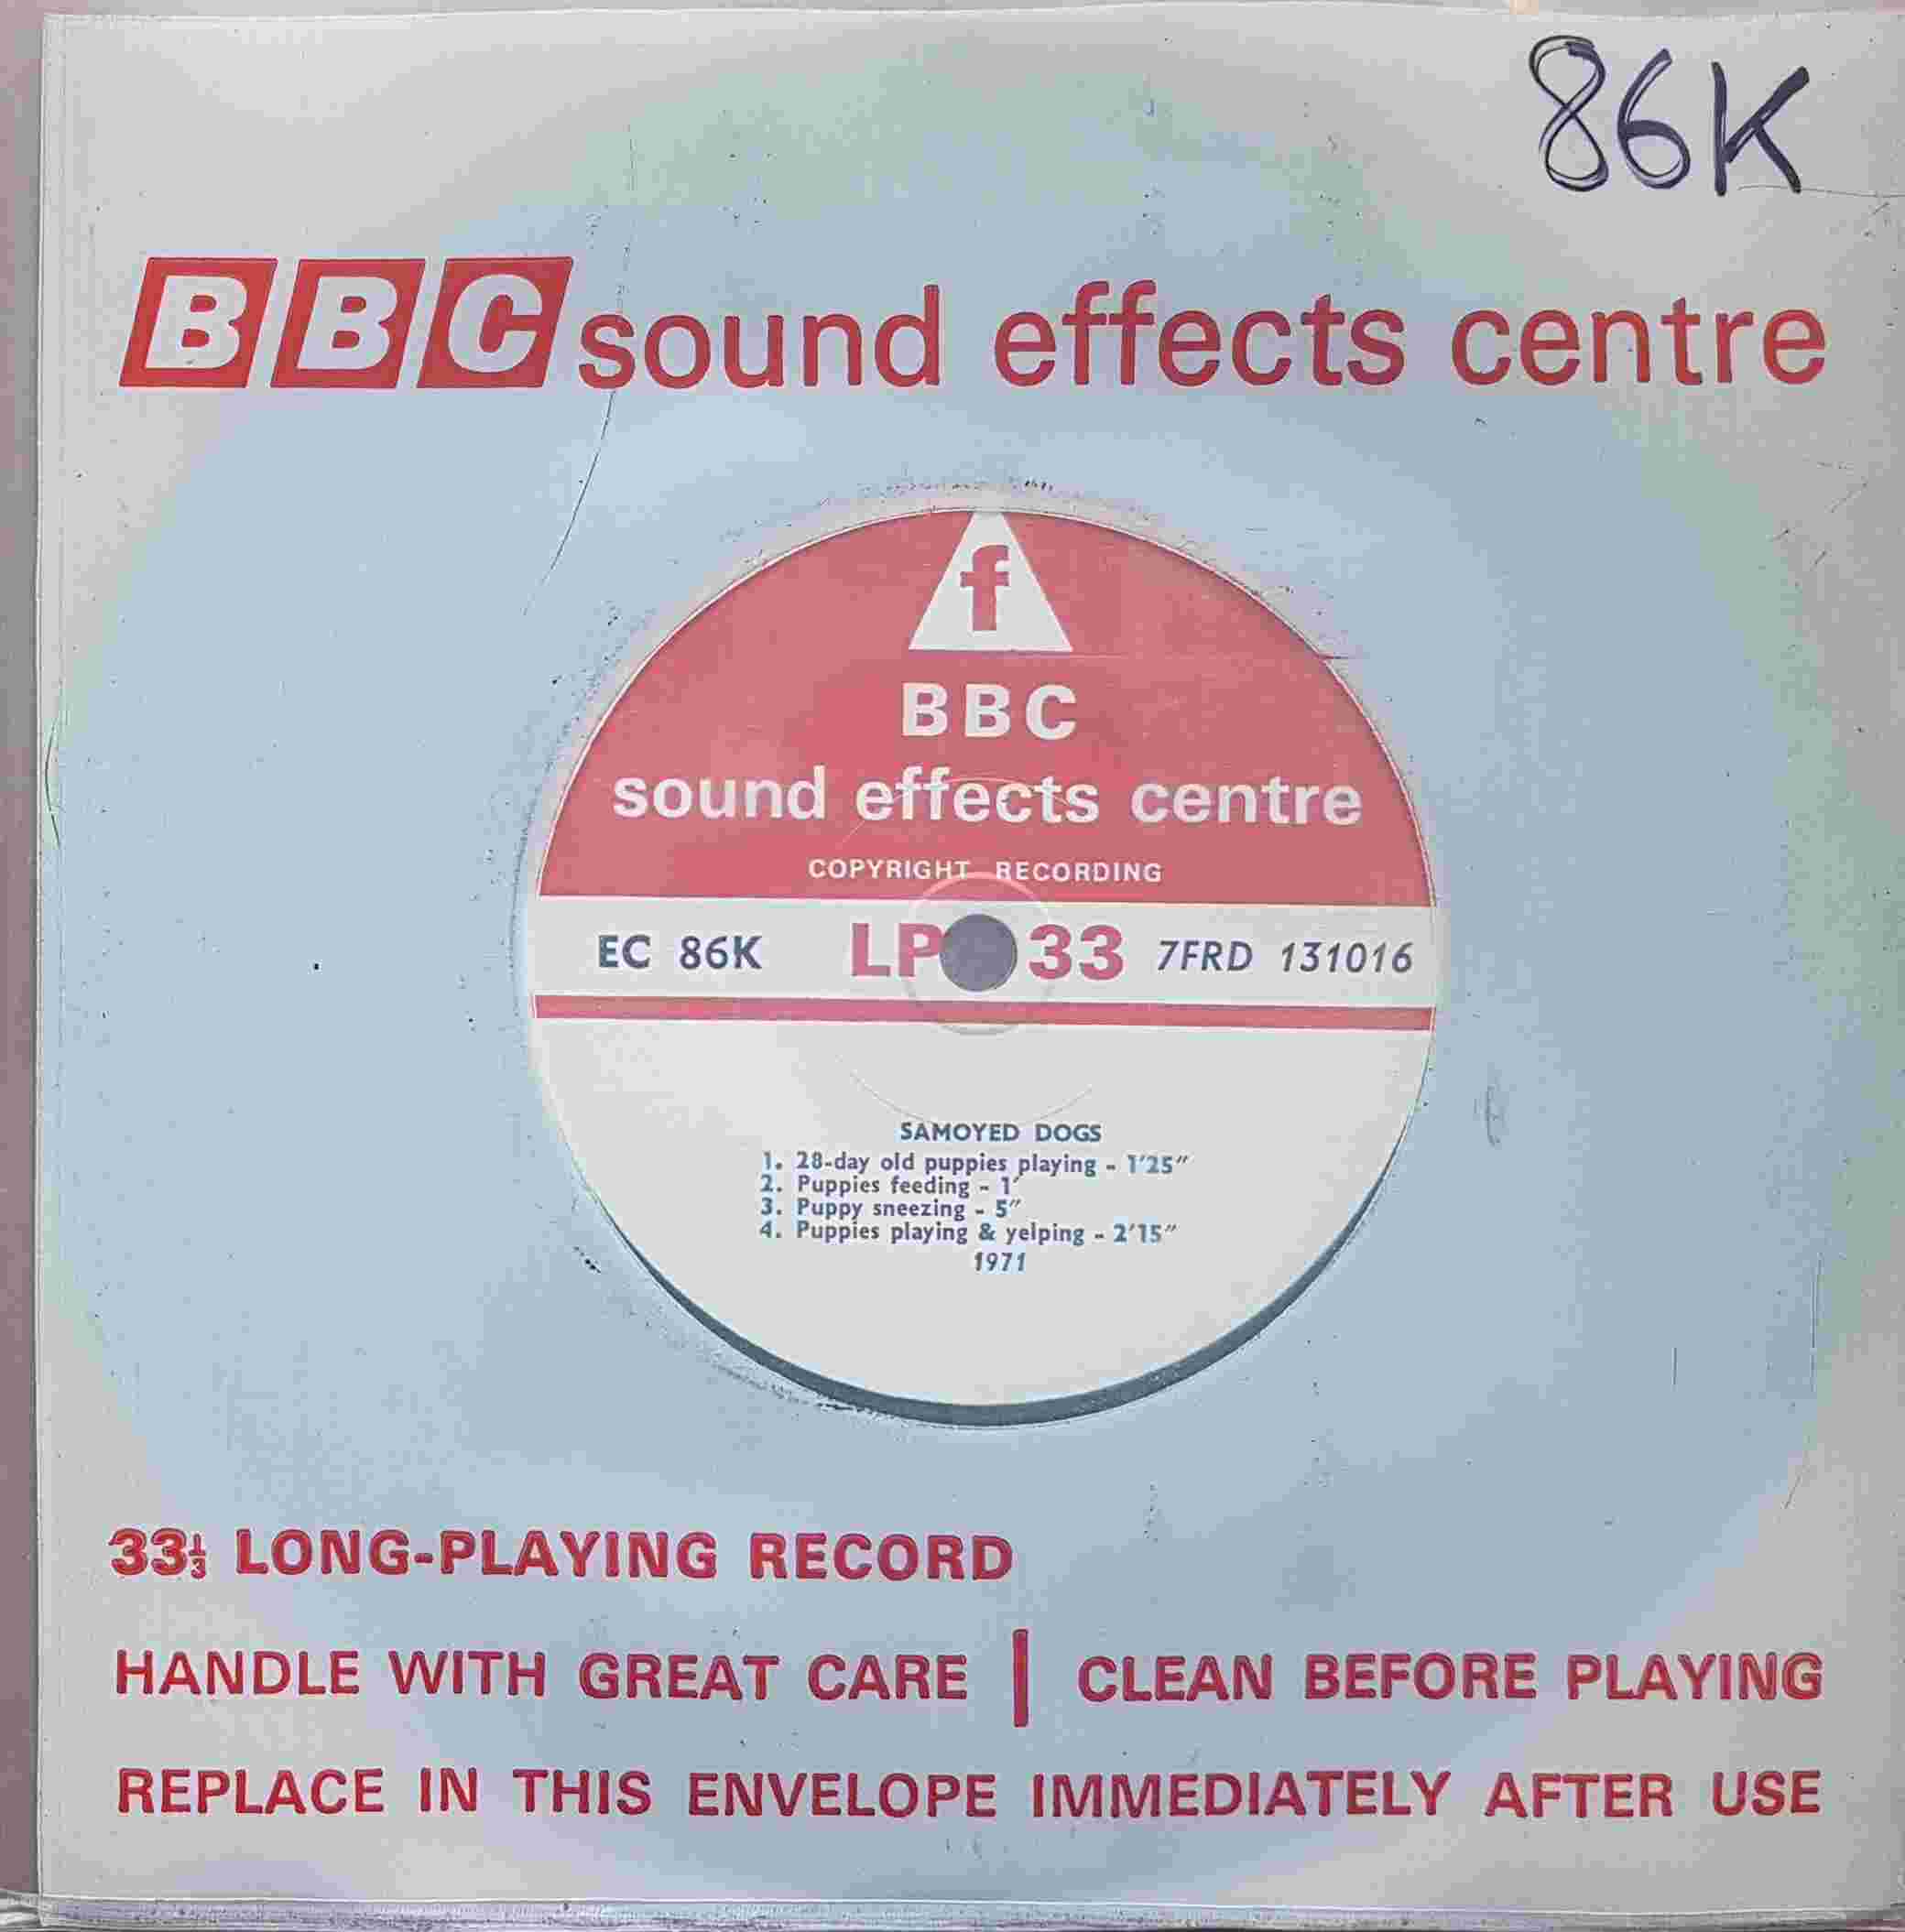 Picture of EC 86K Samoyed dogs by artist Not registered from the BBC singles - Records and Tapes library